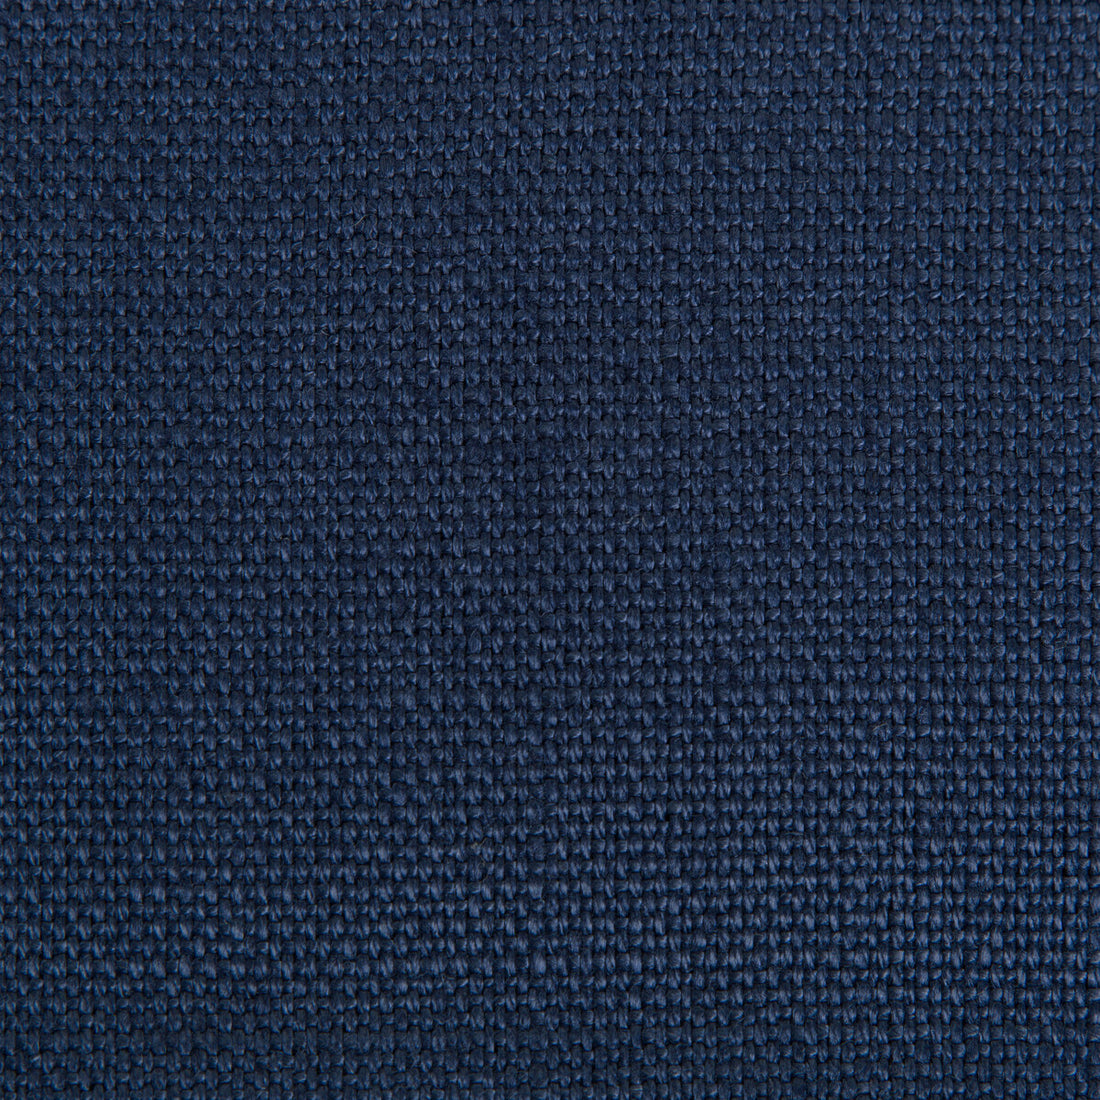 Hampton Linen fabric in nautical color - pattern 2012171.5050.0 - by Lee Jofa in the Colour Complements II collection